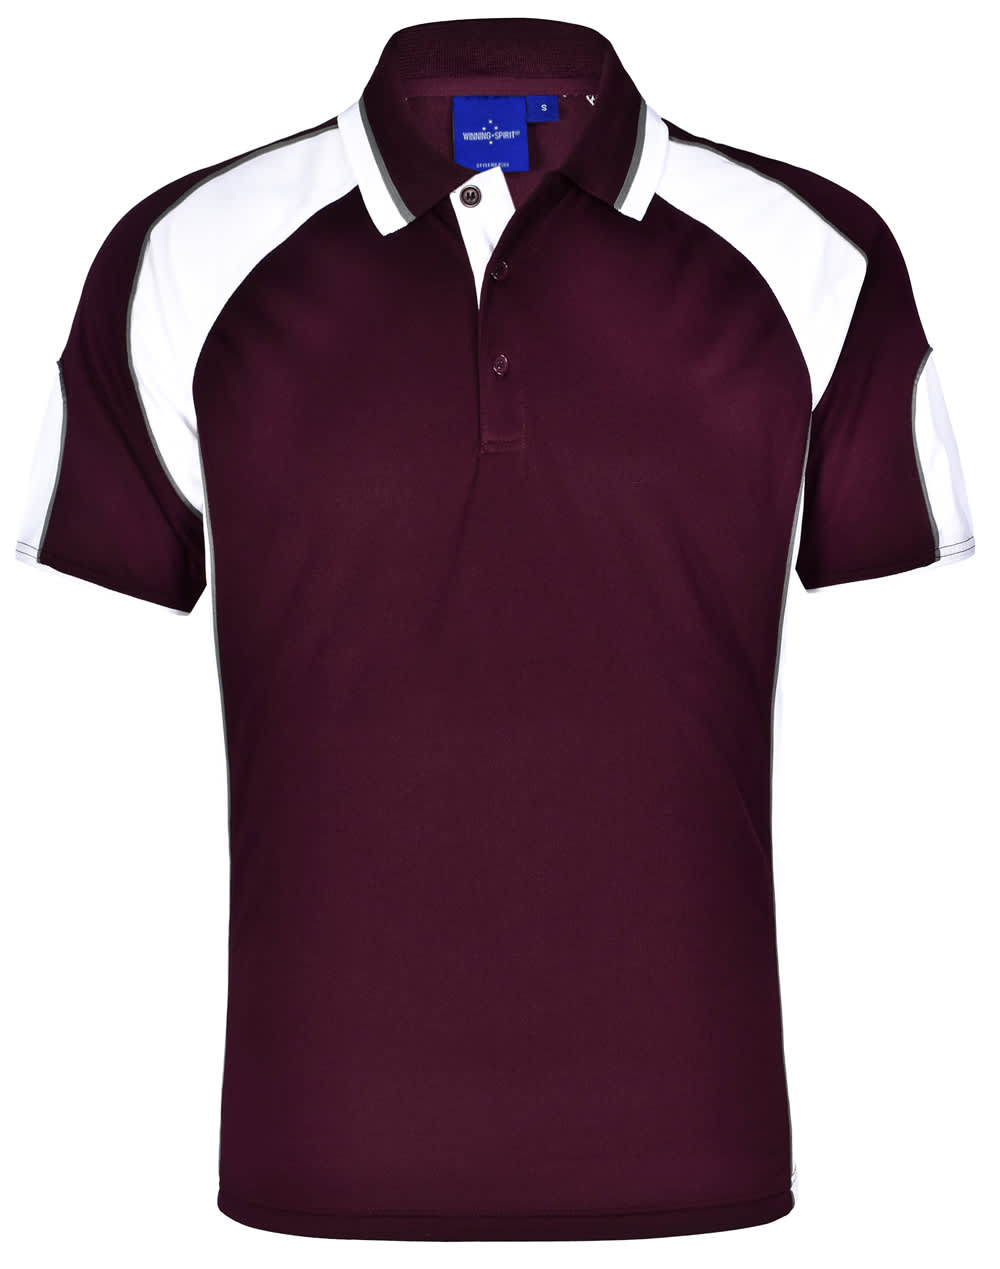 Mens CoolDry Contrast Short Sleeve Polo with Sleeve Panels PS61 | Maroon/White